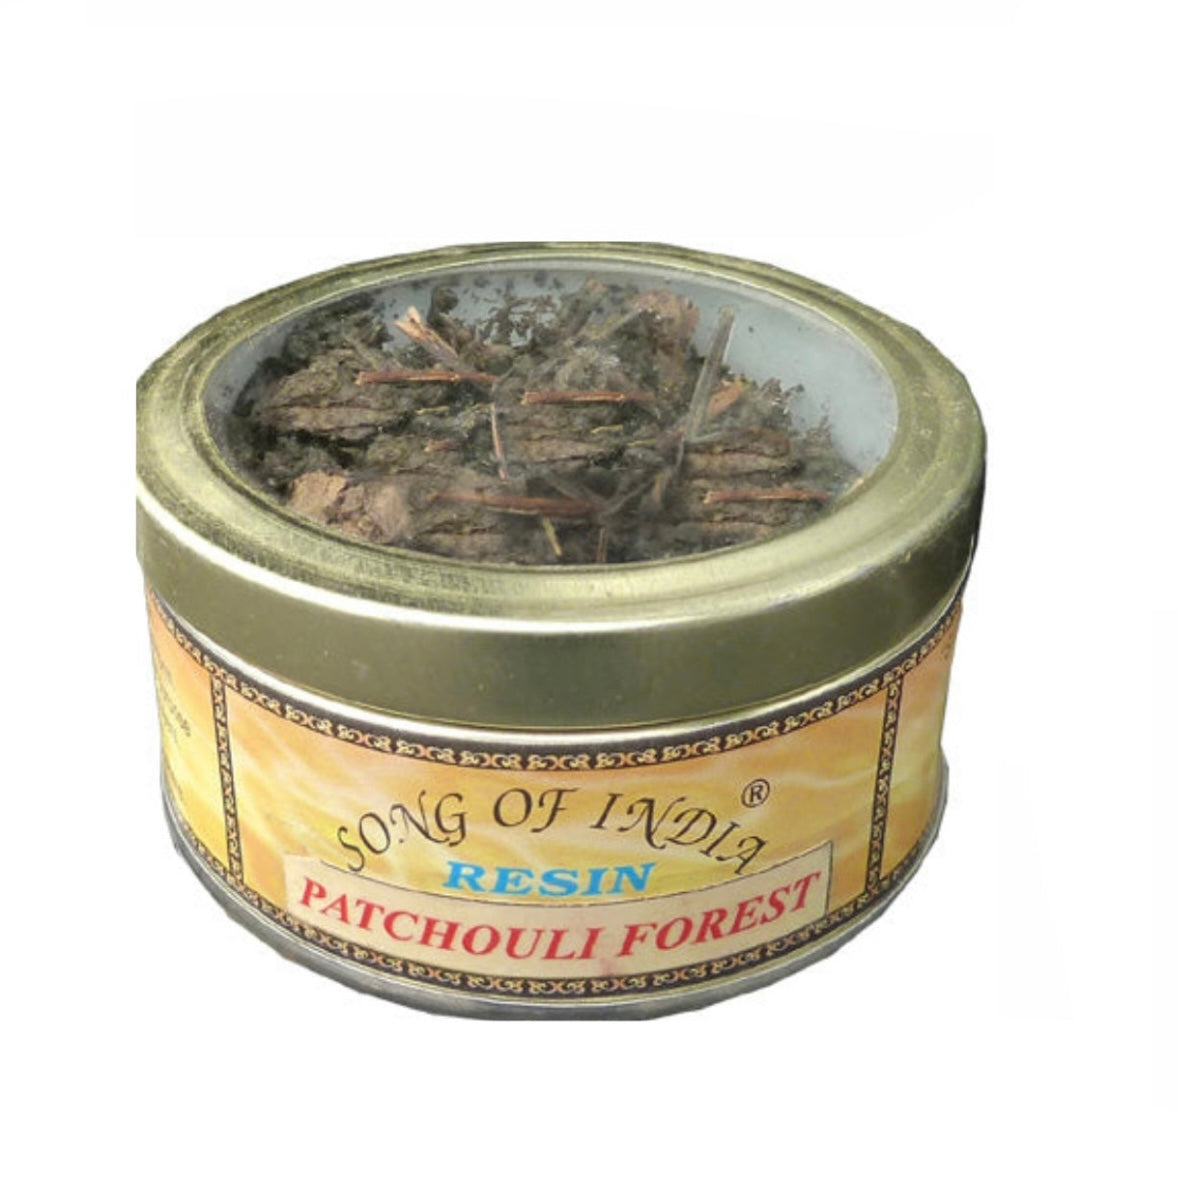 Song of India Patchouli Forest Incenso in Resina 100% Naturale - 10g